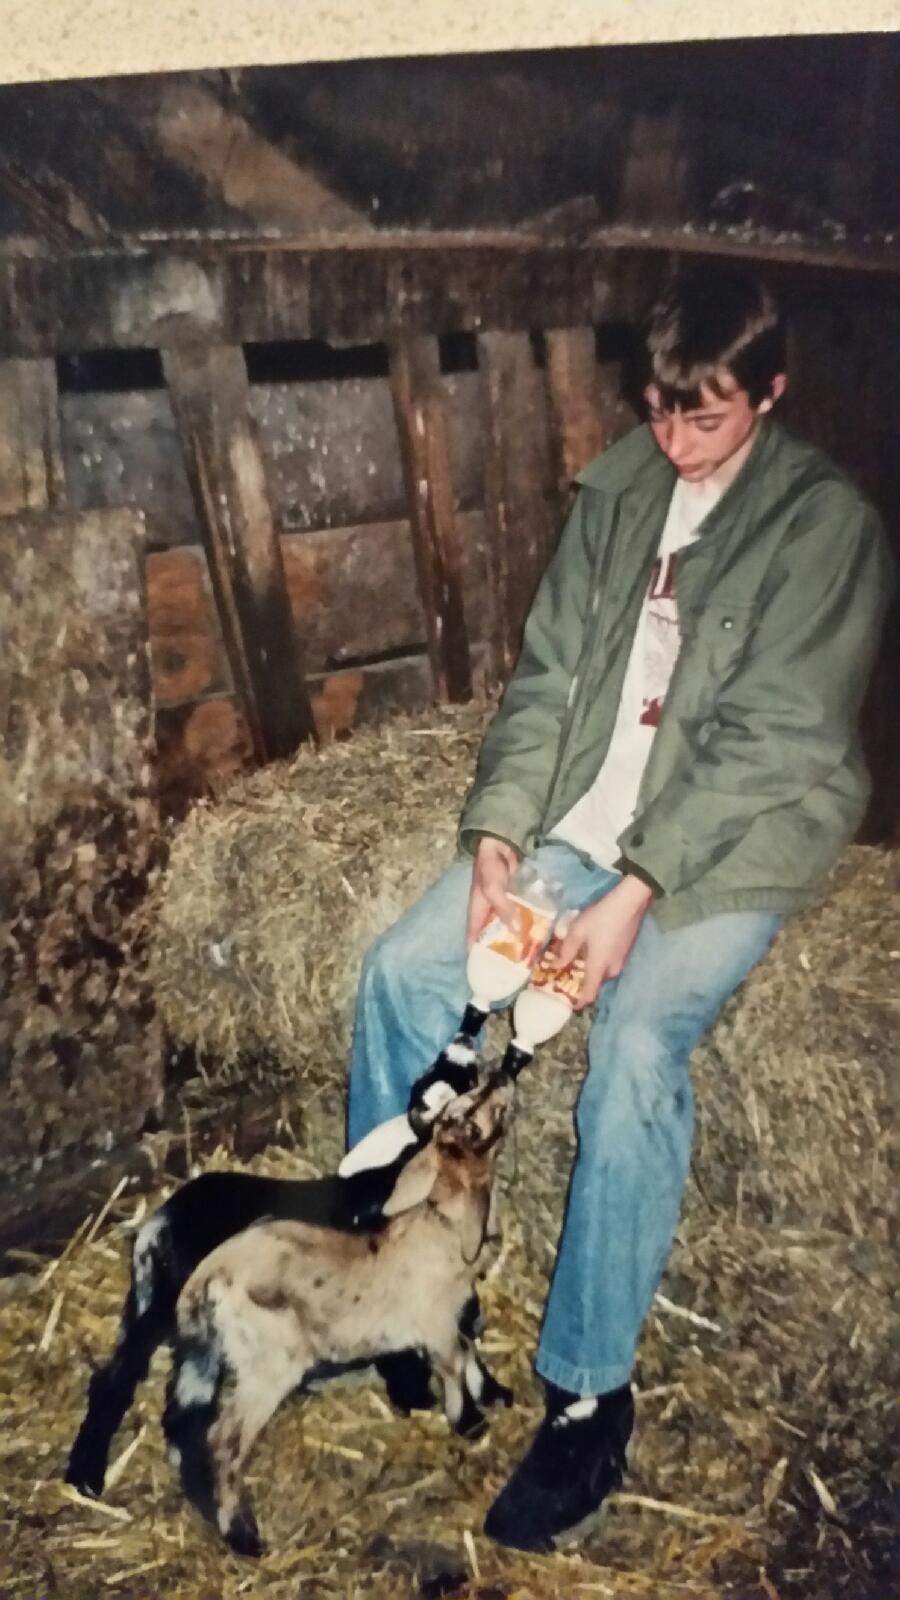 Bottle feeding 2 goats baby goats. I was around 13 in this pic as well. 